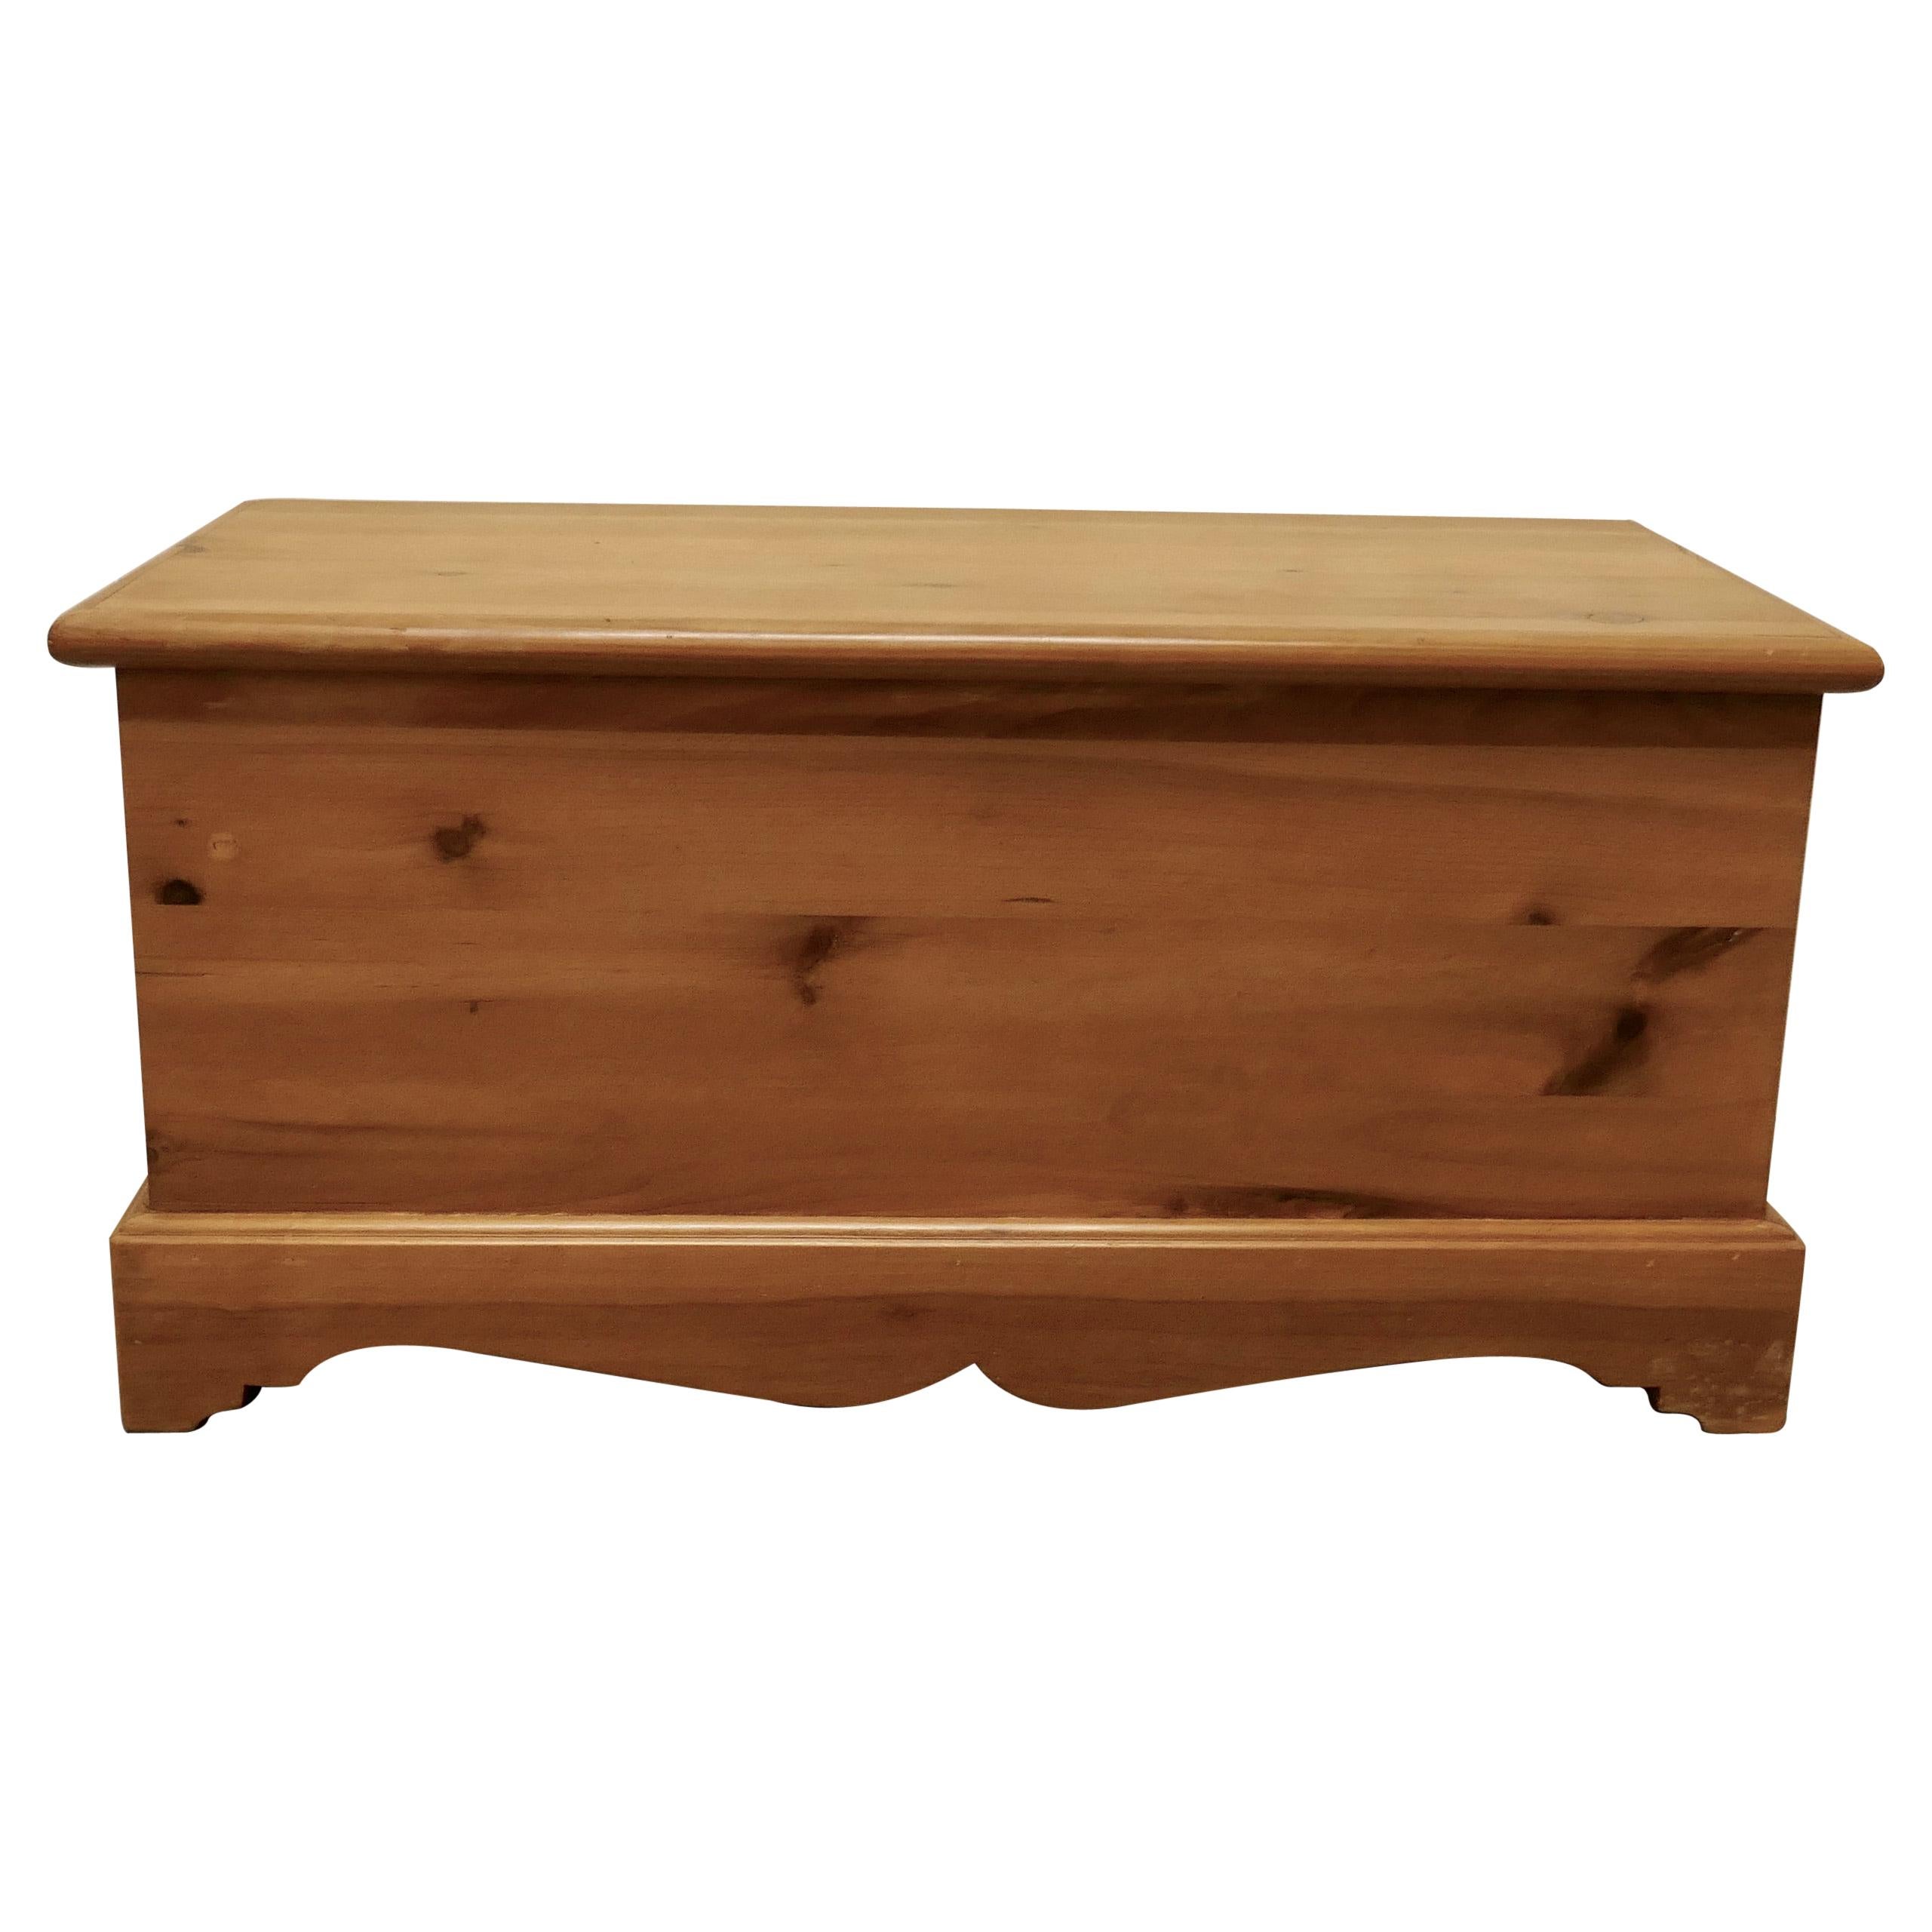 Golden Pine Coffer, Blanket Box or Coffee Table